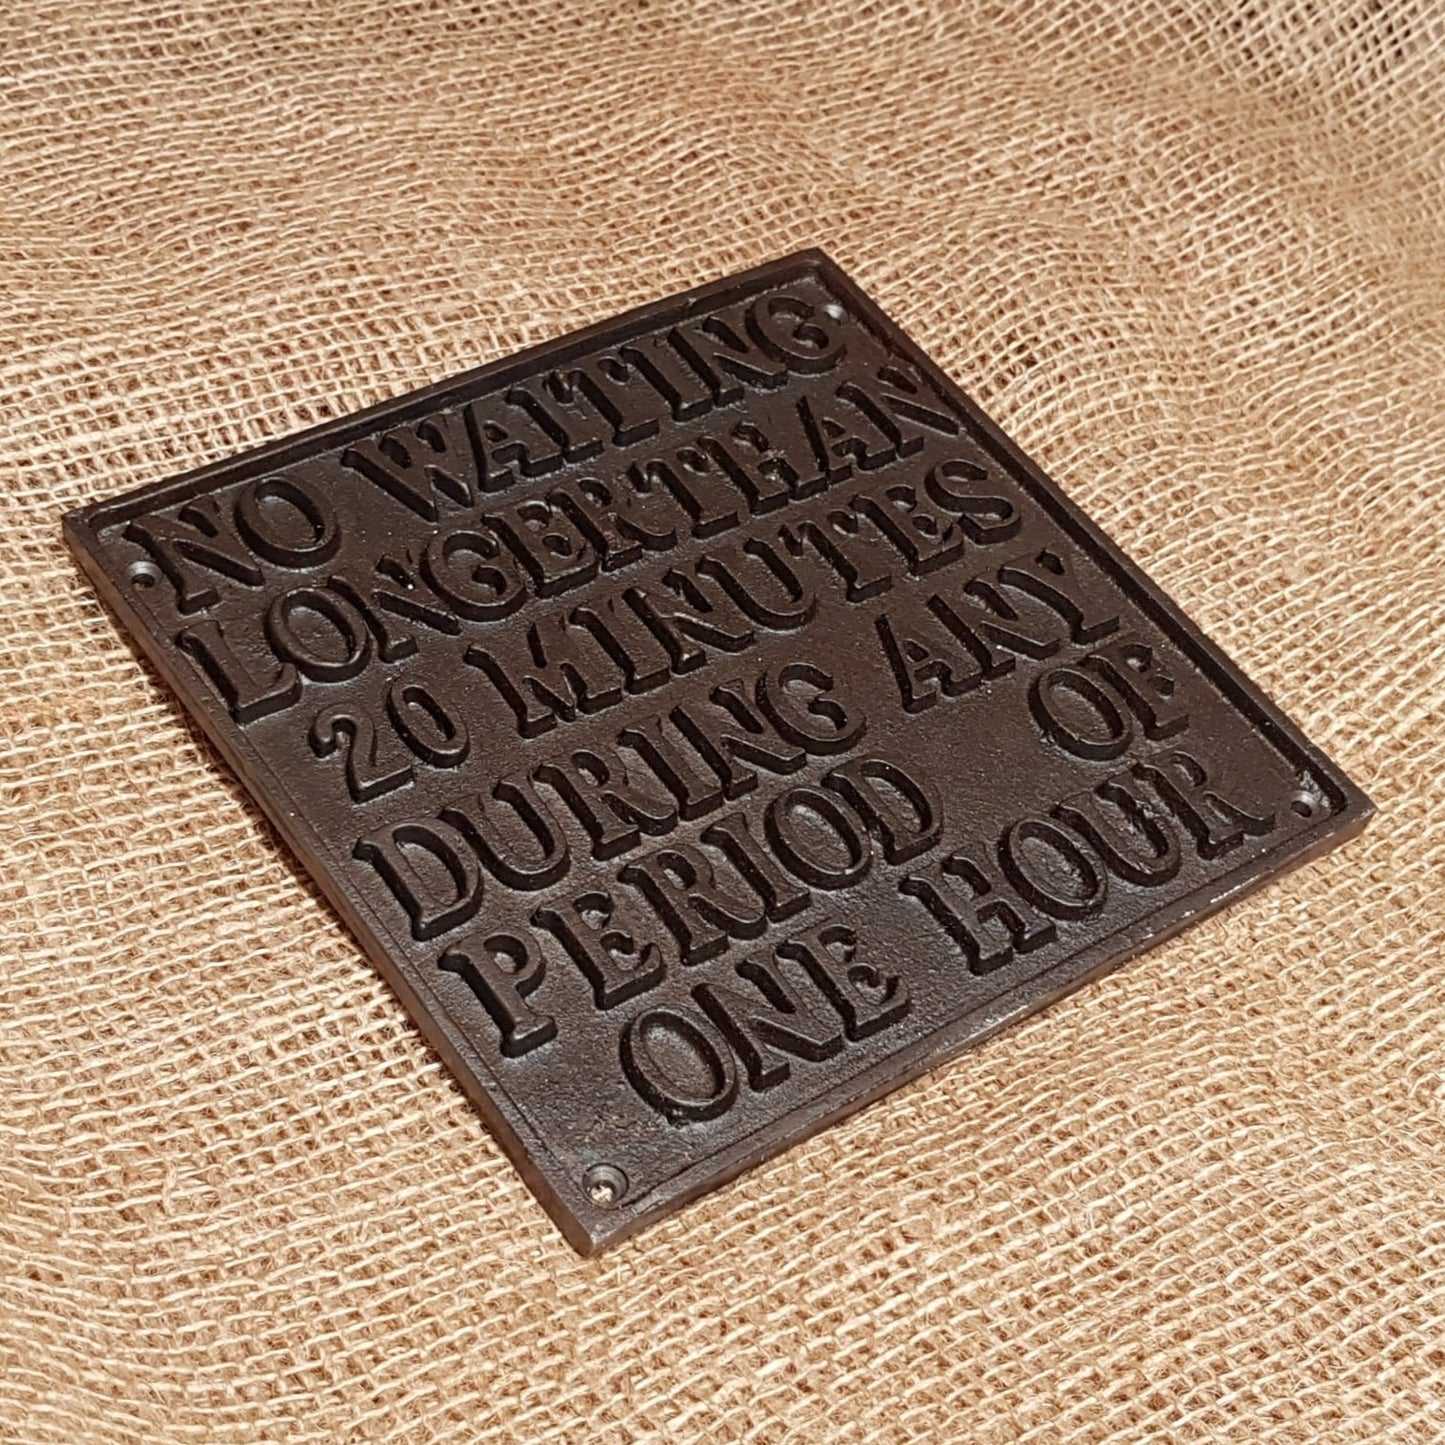 No Waiting longer than 20 Minutes - Spearhead Collection - Plaques and Signs - Exterior Decor, Home Decor, Office Decor, Plaques and Signs